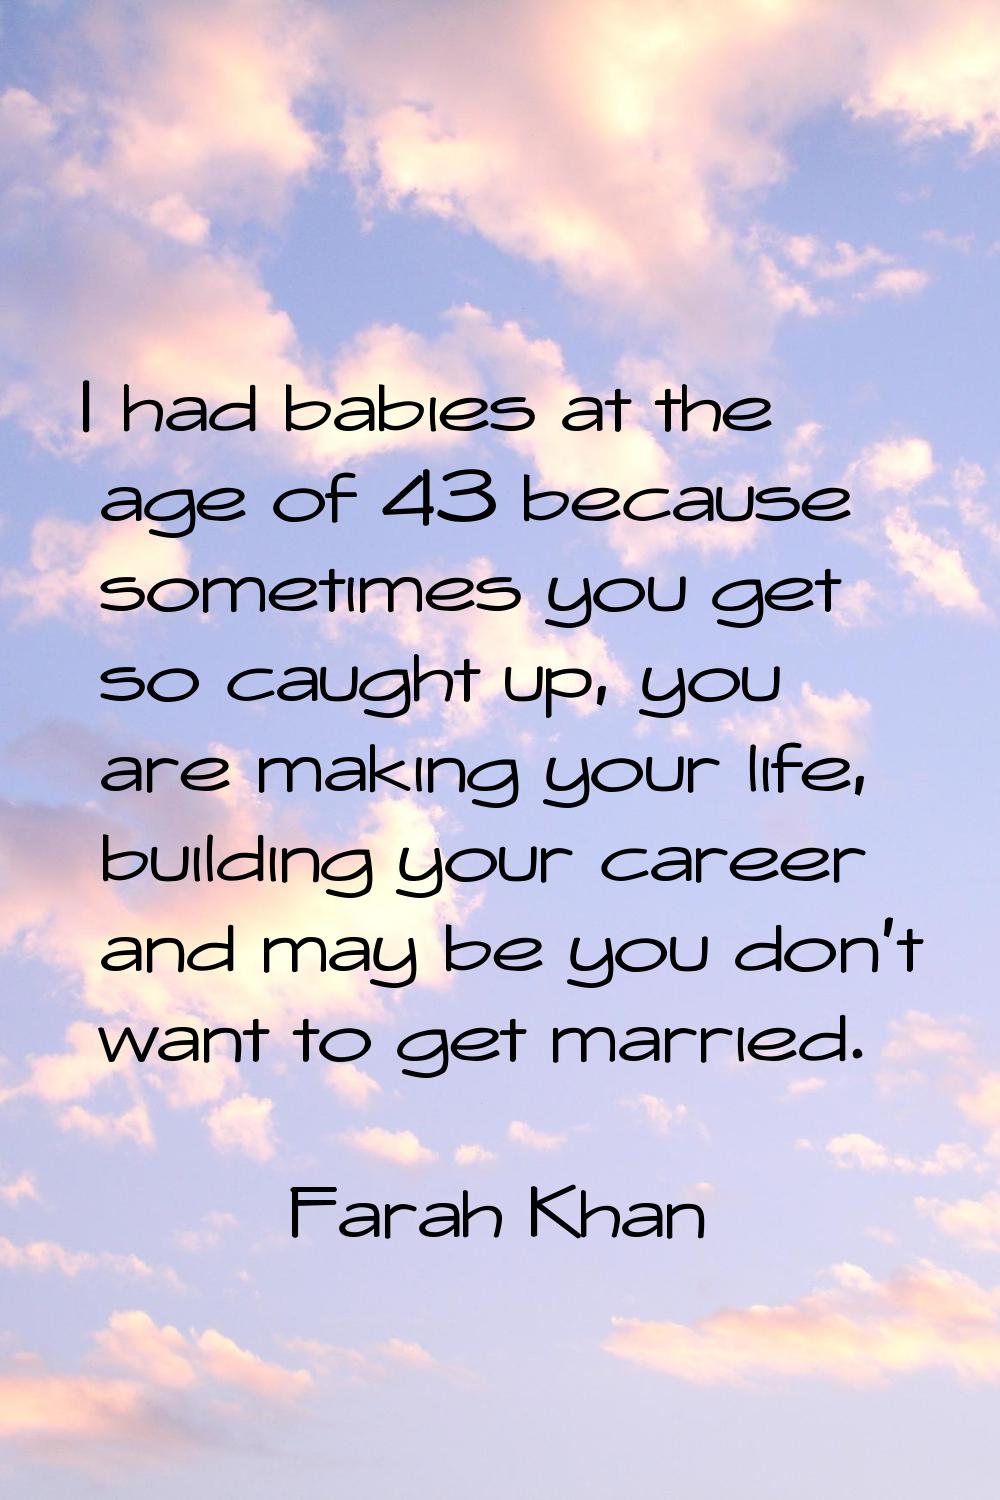 I had babies at the age of 43 because sometimes you get so caught up, you are making your life, bui